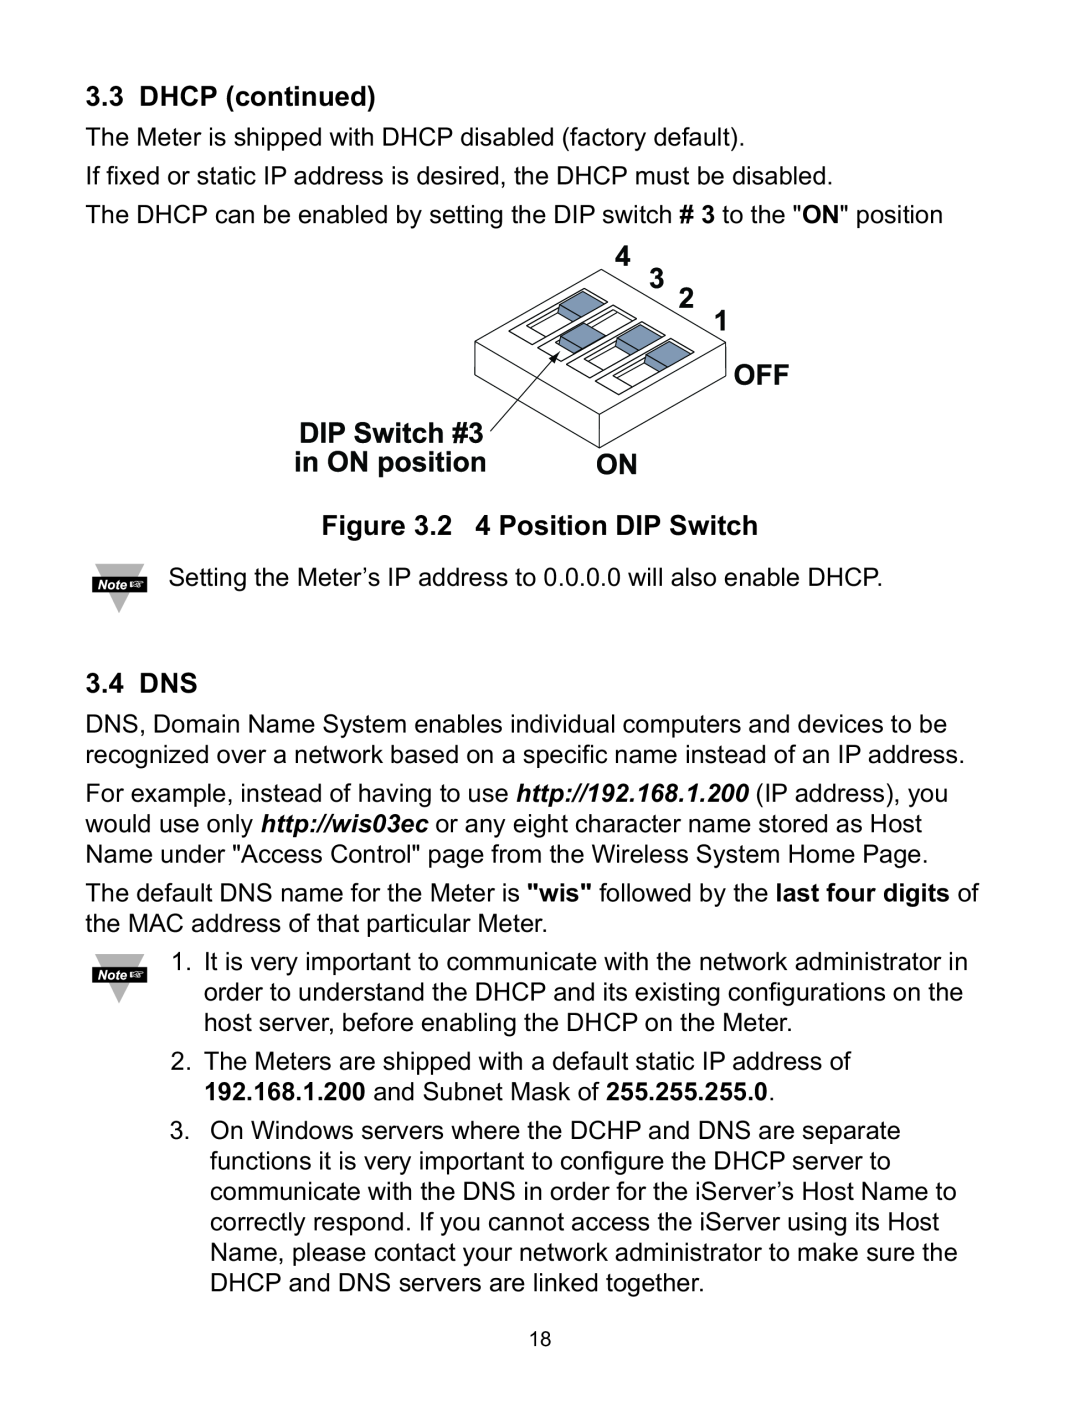 Omega WI8XX-U manual DHCP continued, 2 4 Position DIP Switch, 3.4 DNS 